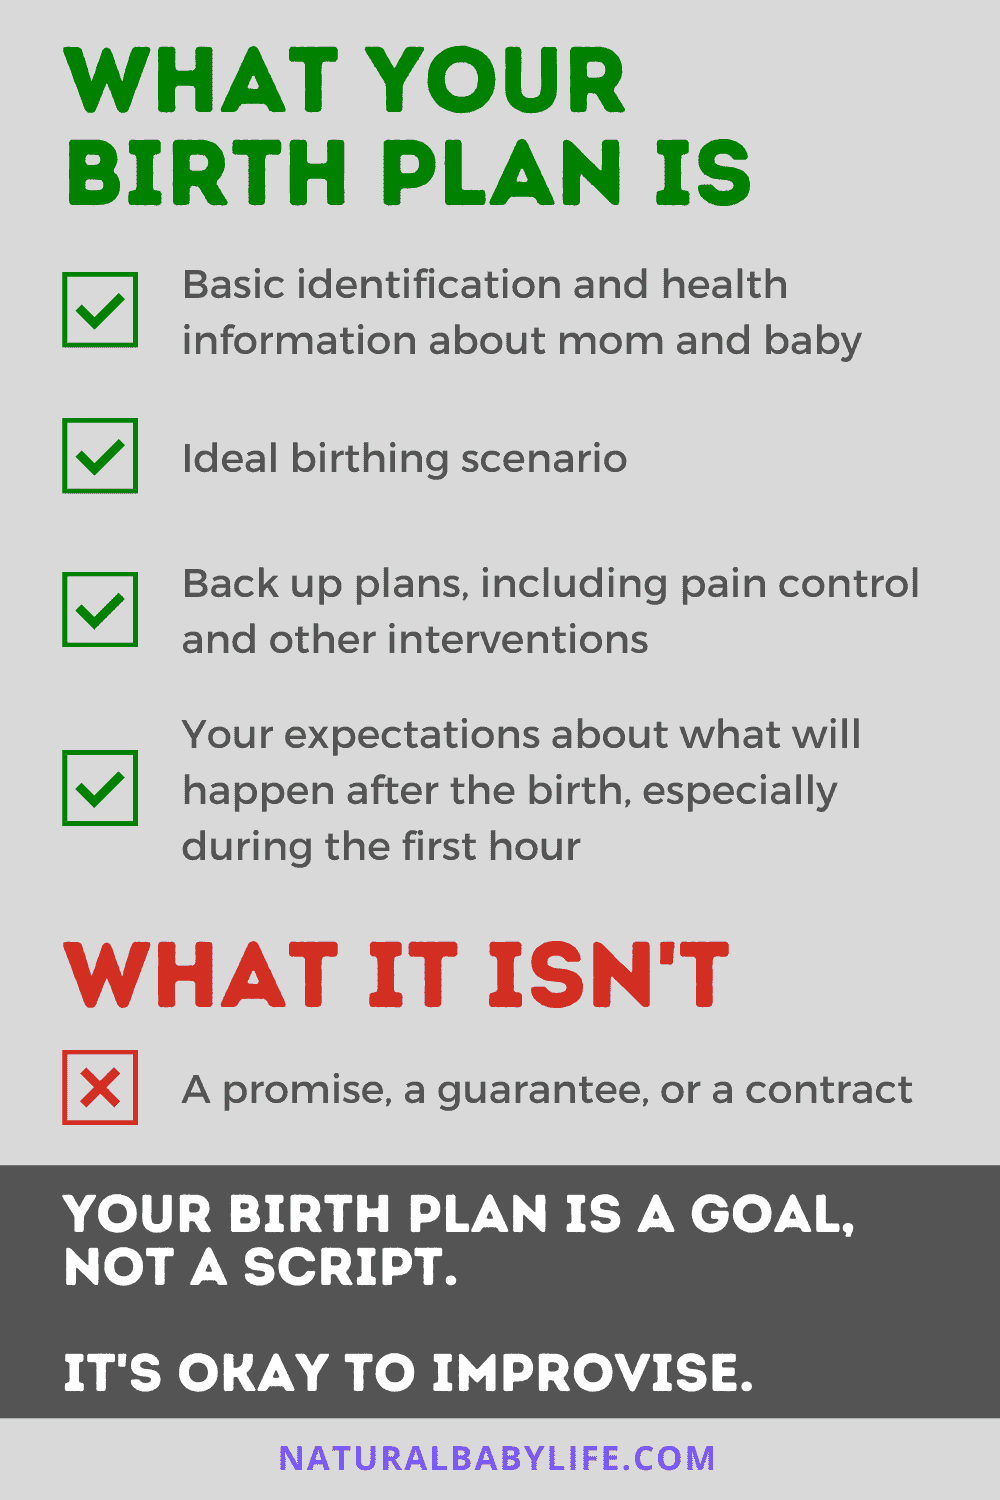 How To Write a Birth Plan (And Make Sure the Hospital Follows It)